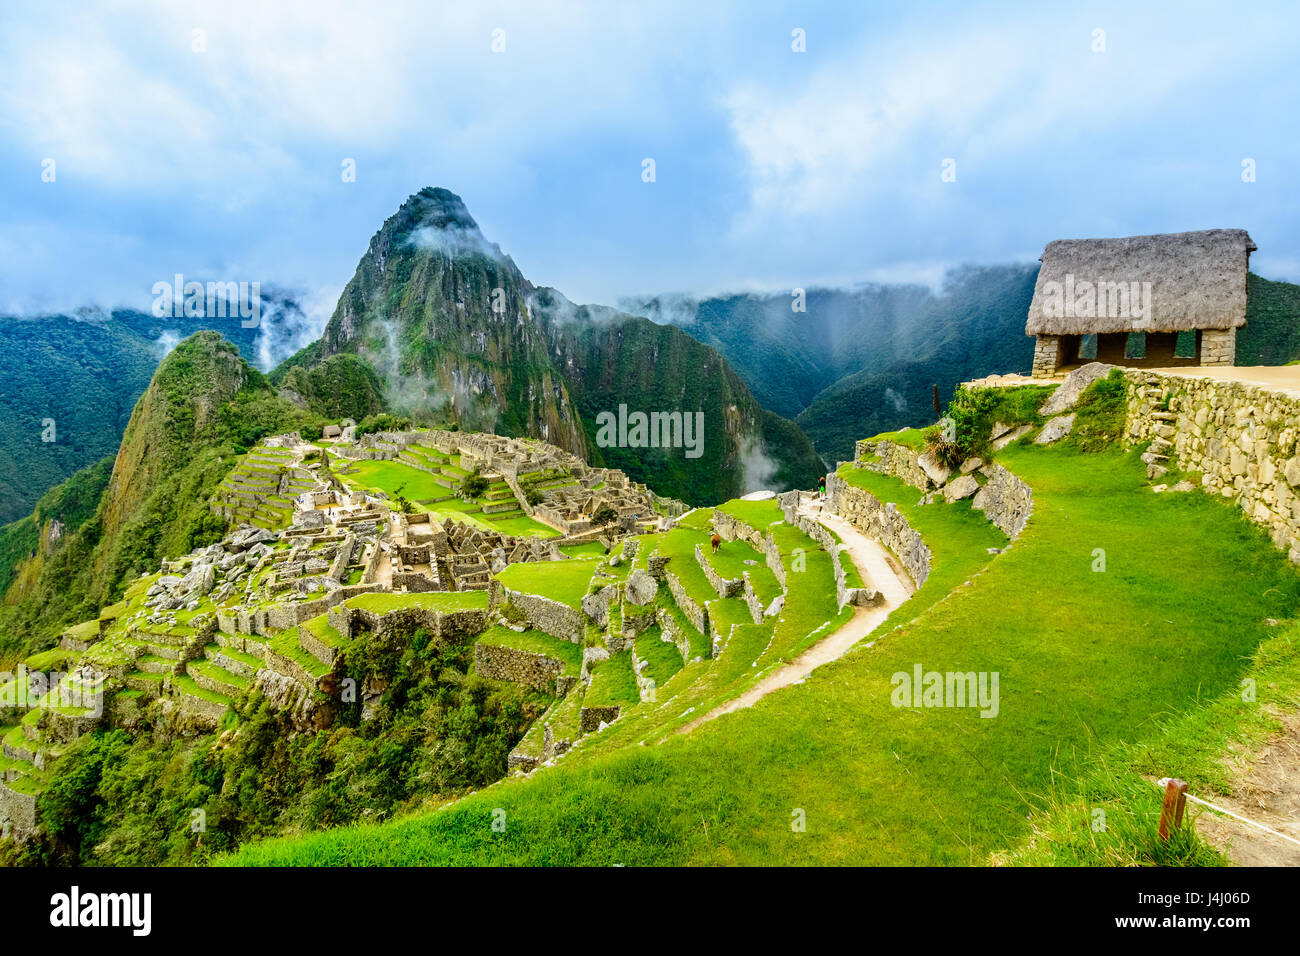 Overview of Machu Picchu, Guard house, agriculture terraces, Wayna Picchu and surrounding mountains in the background Stock Photo